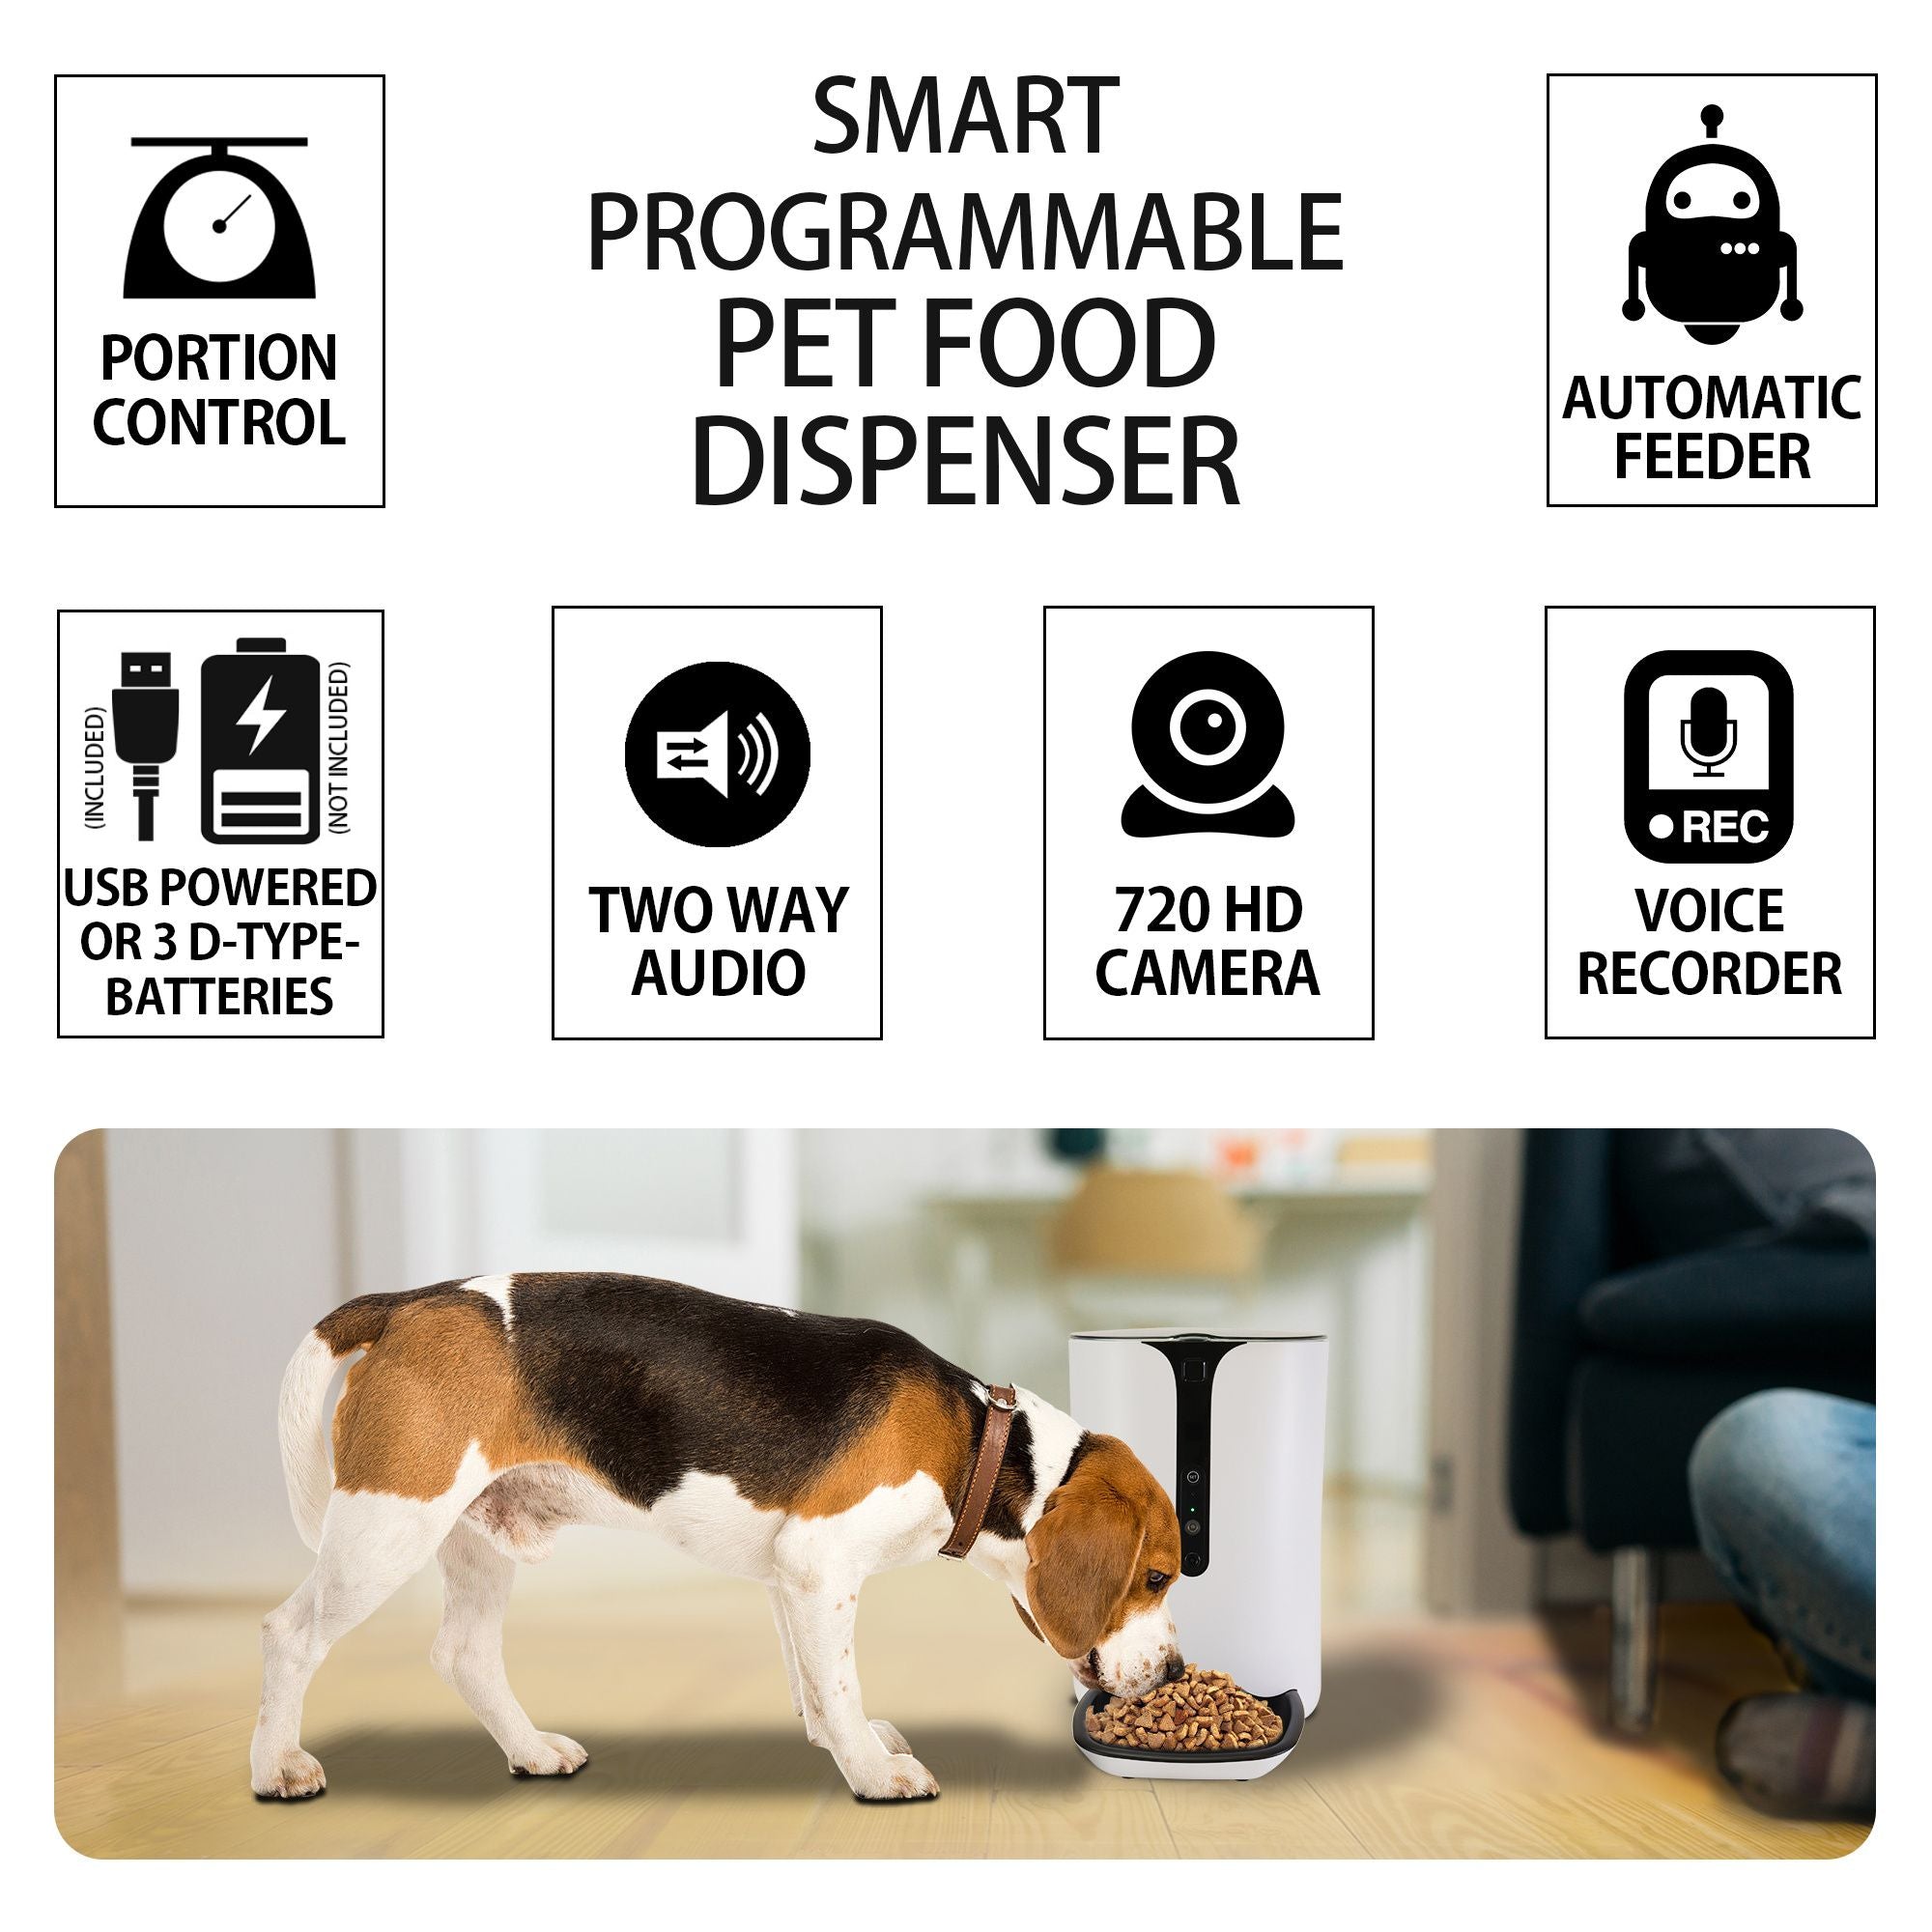 Lifestyle image of a white, black, and tan beagle eating from the Lentek smart pet food dispenser. Text at the top reads, "Smart programmable food dispenser," followed by icons and text describing: Portion control; automatic feeder; USB powered or 3 D type batteries; two way audio; 720 HD camera; voice recorder